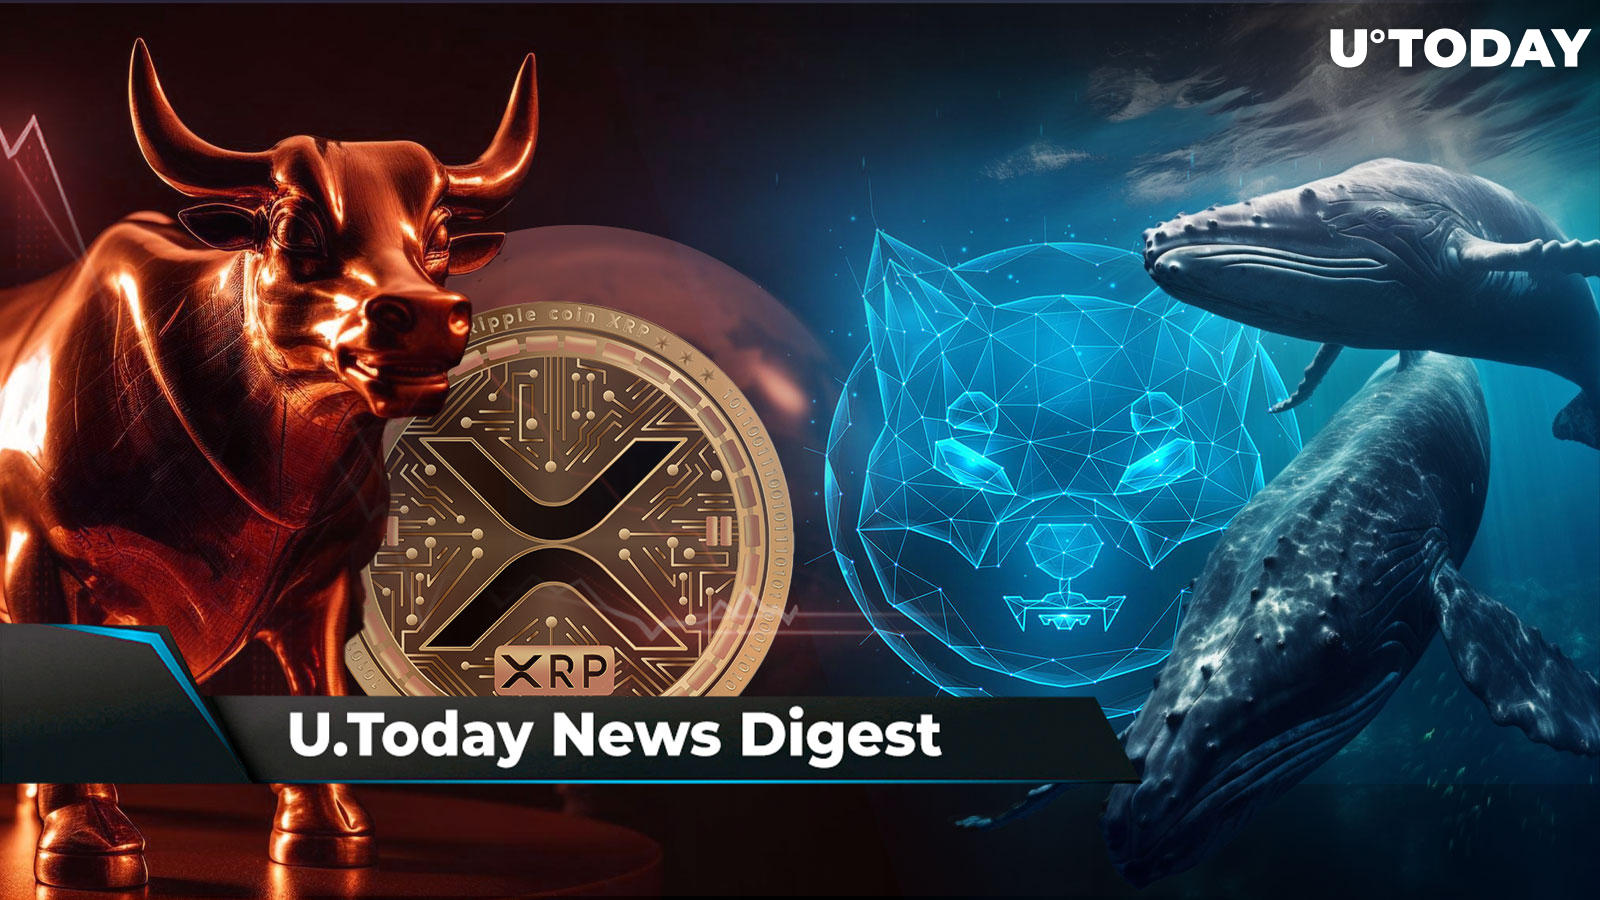 XRP Did Something Unacceptable for Bulls, Shiba Inu Whales Disappear, Bitcoin Breaks Correlation With Tech Stocks: Crypto News Digest by U.Today